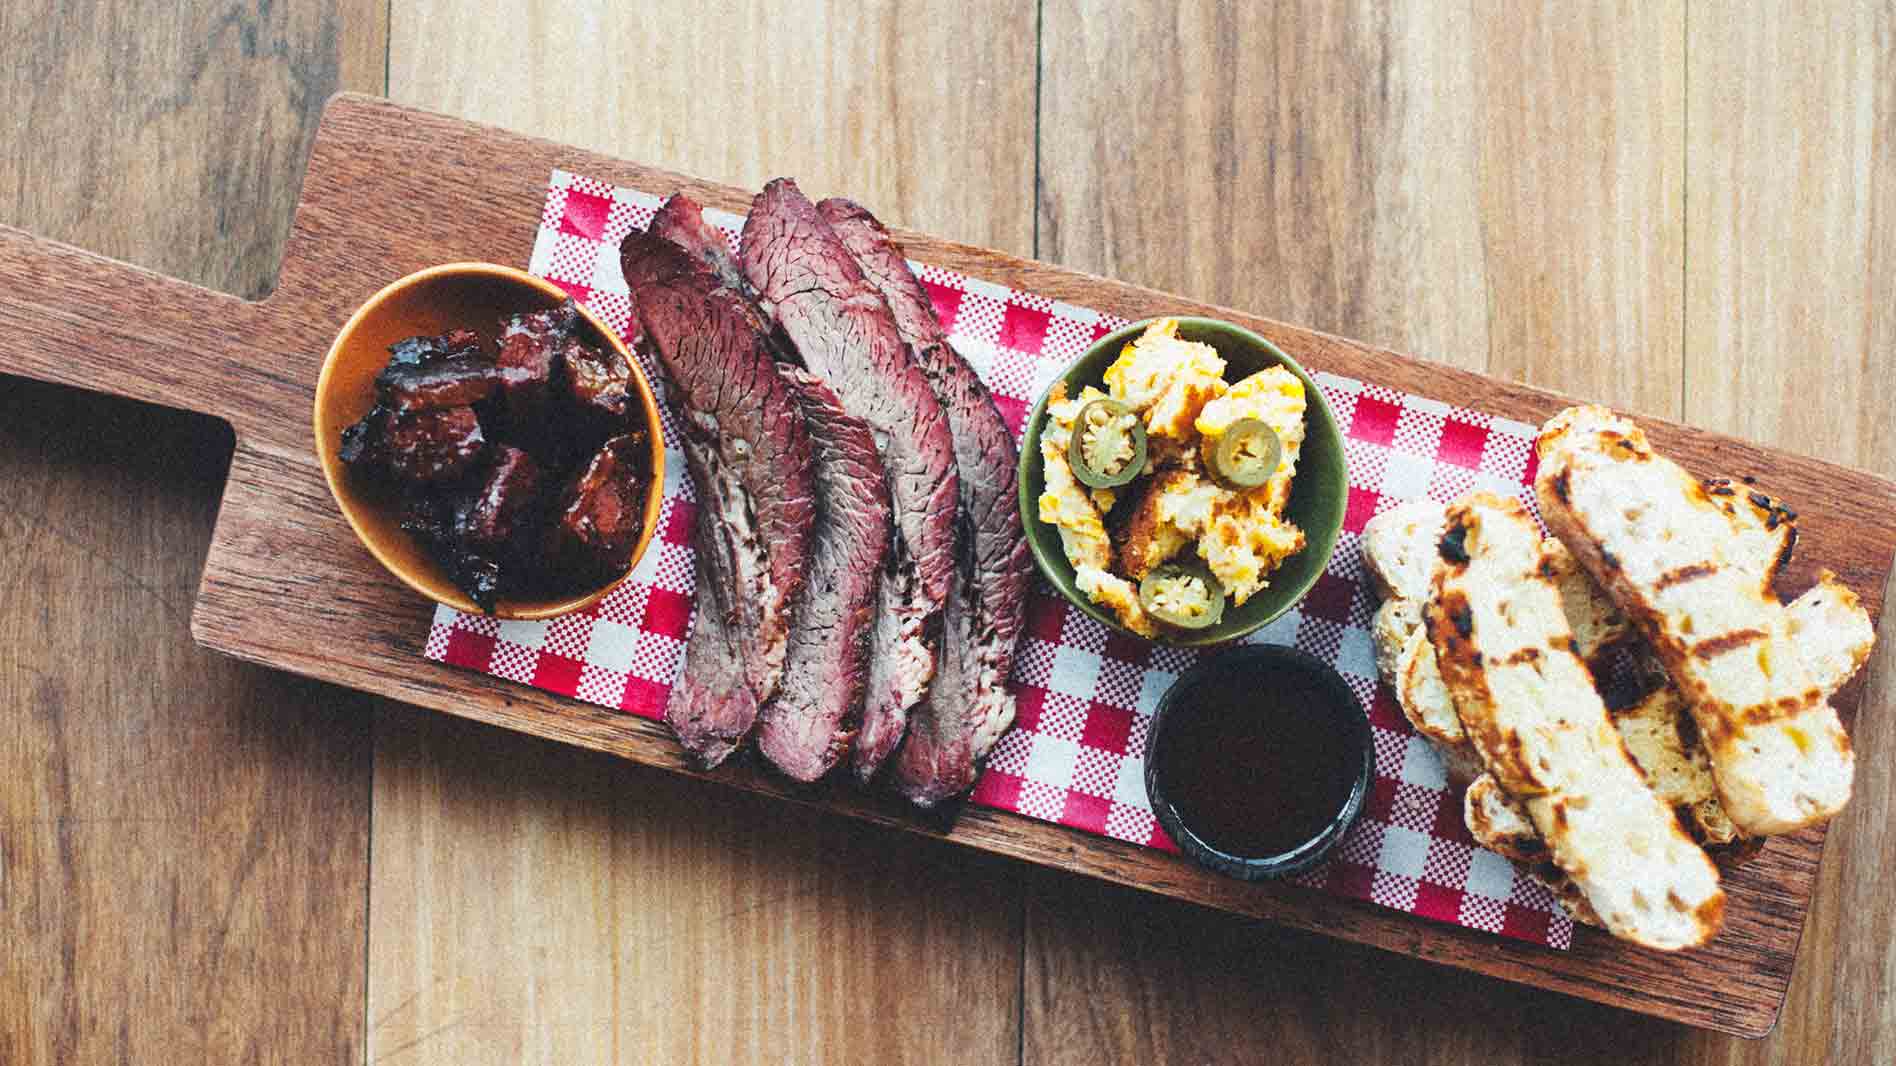 Texas Tasting Platter with Brisket Two Ways